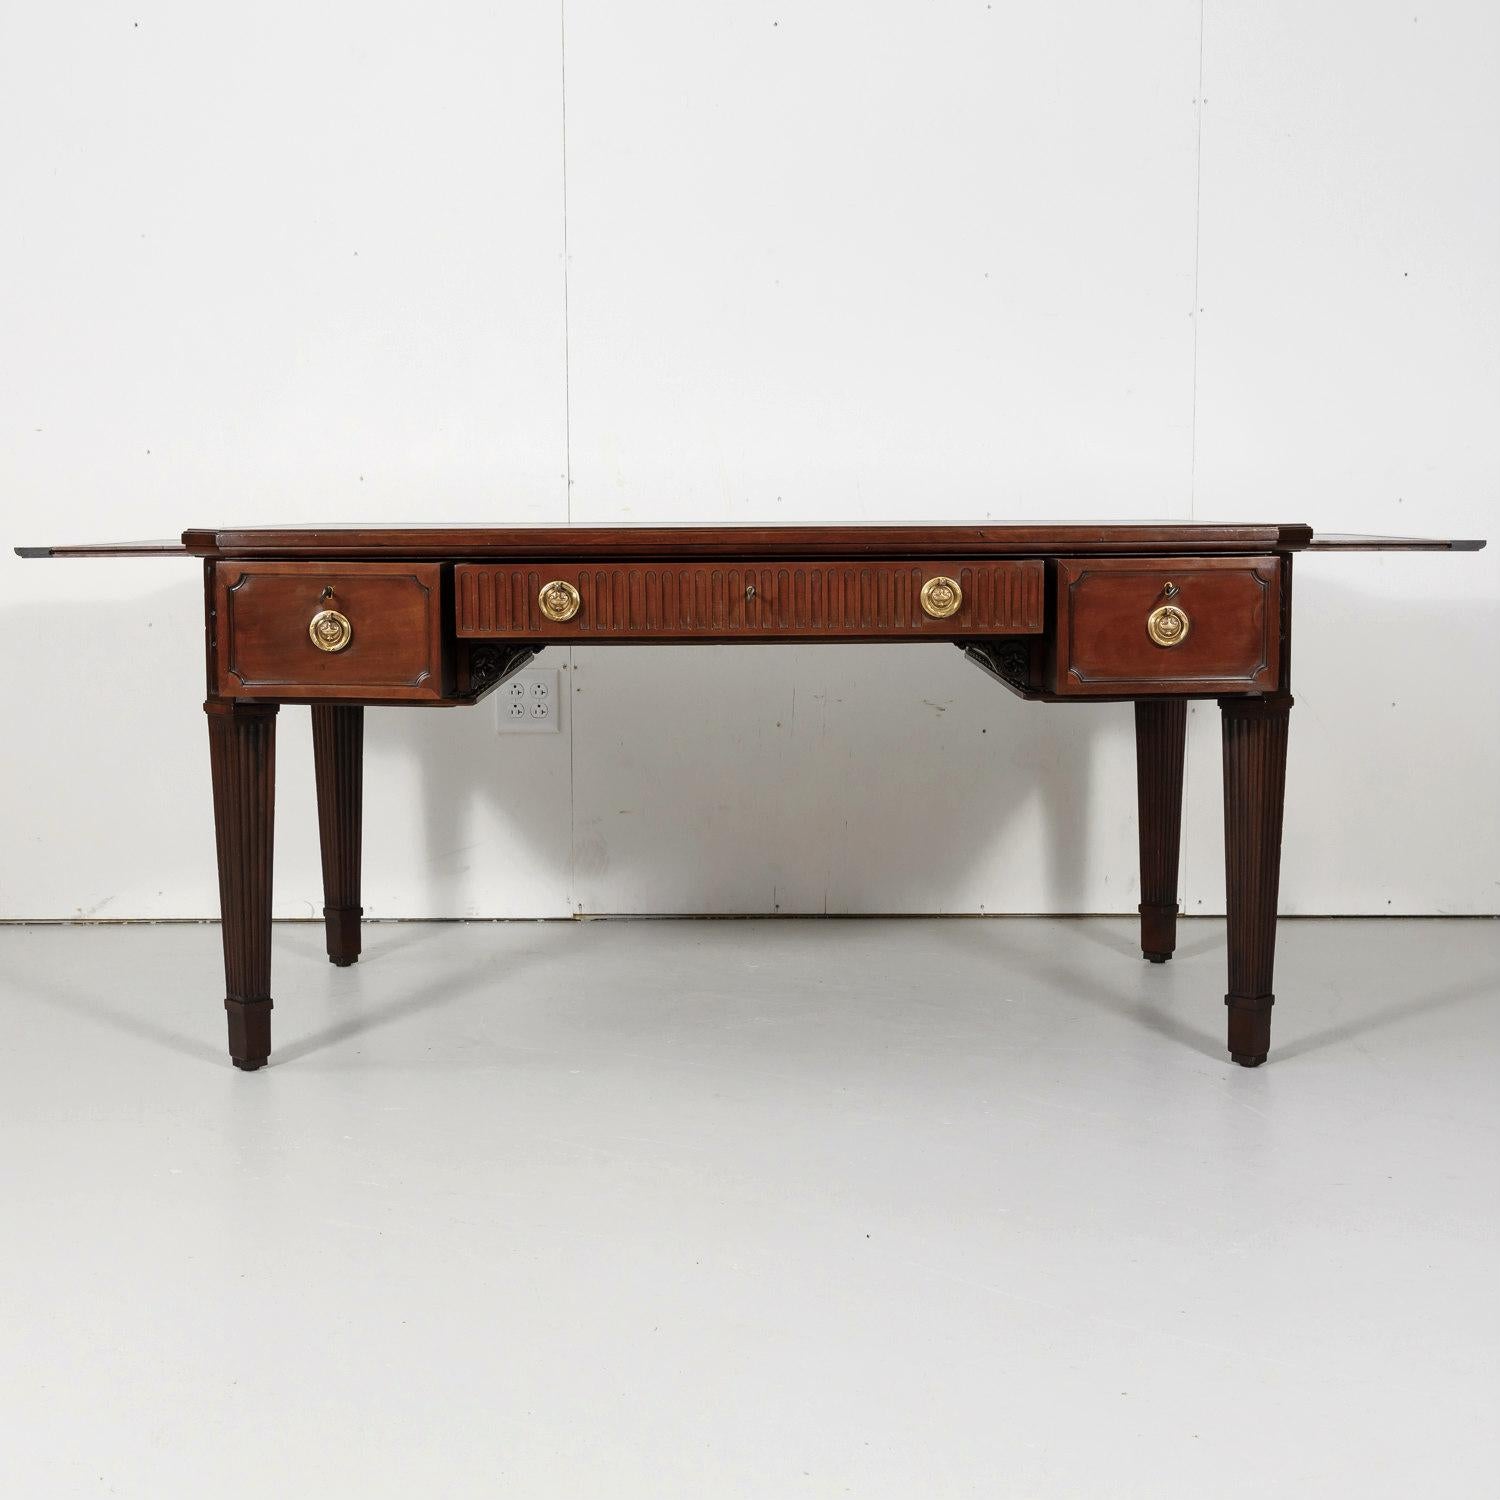 19th Century French Louis XVI Style Walnut Bureau Plat or Desk with Leather Top 1